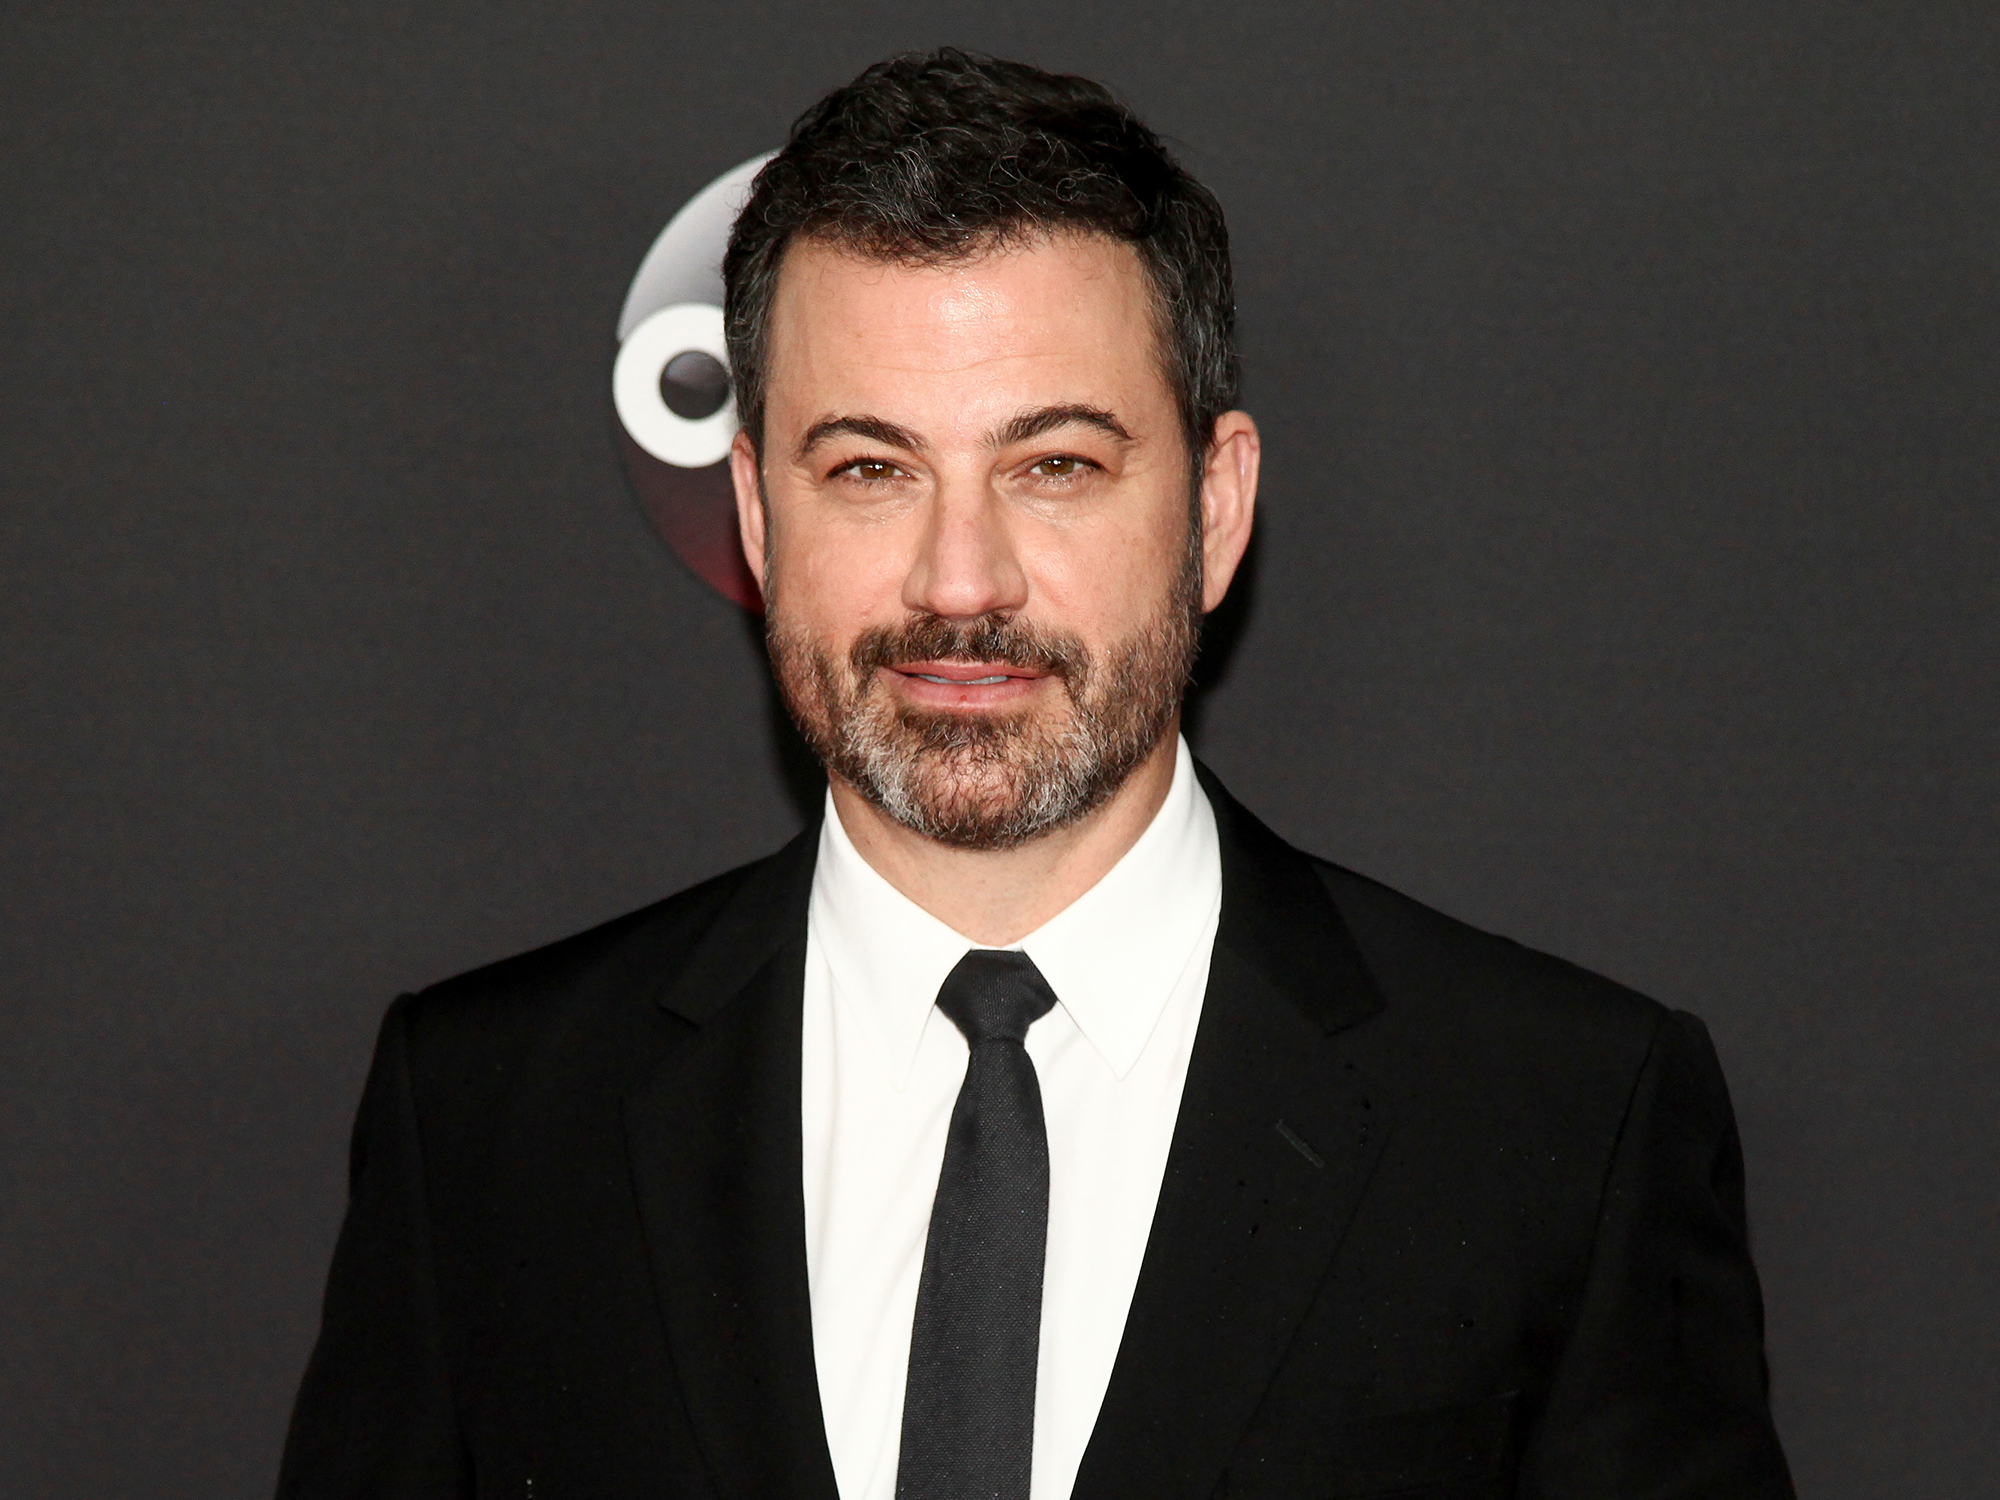 Jimmy Kimmel Apologizes for ‘Thoughtless’ Blackface Sketches | Hot ...